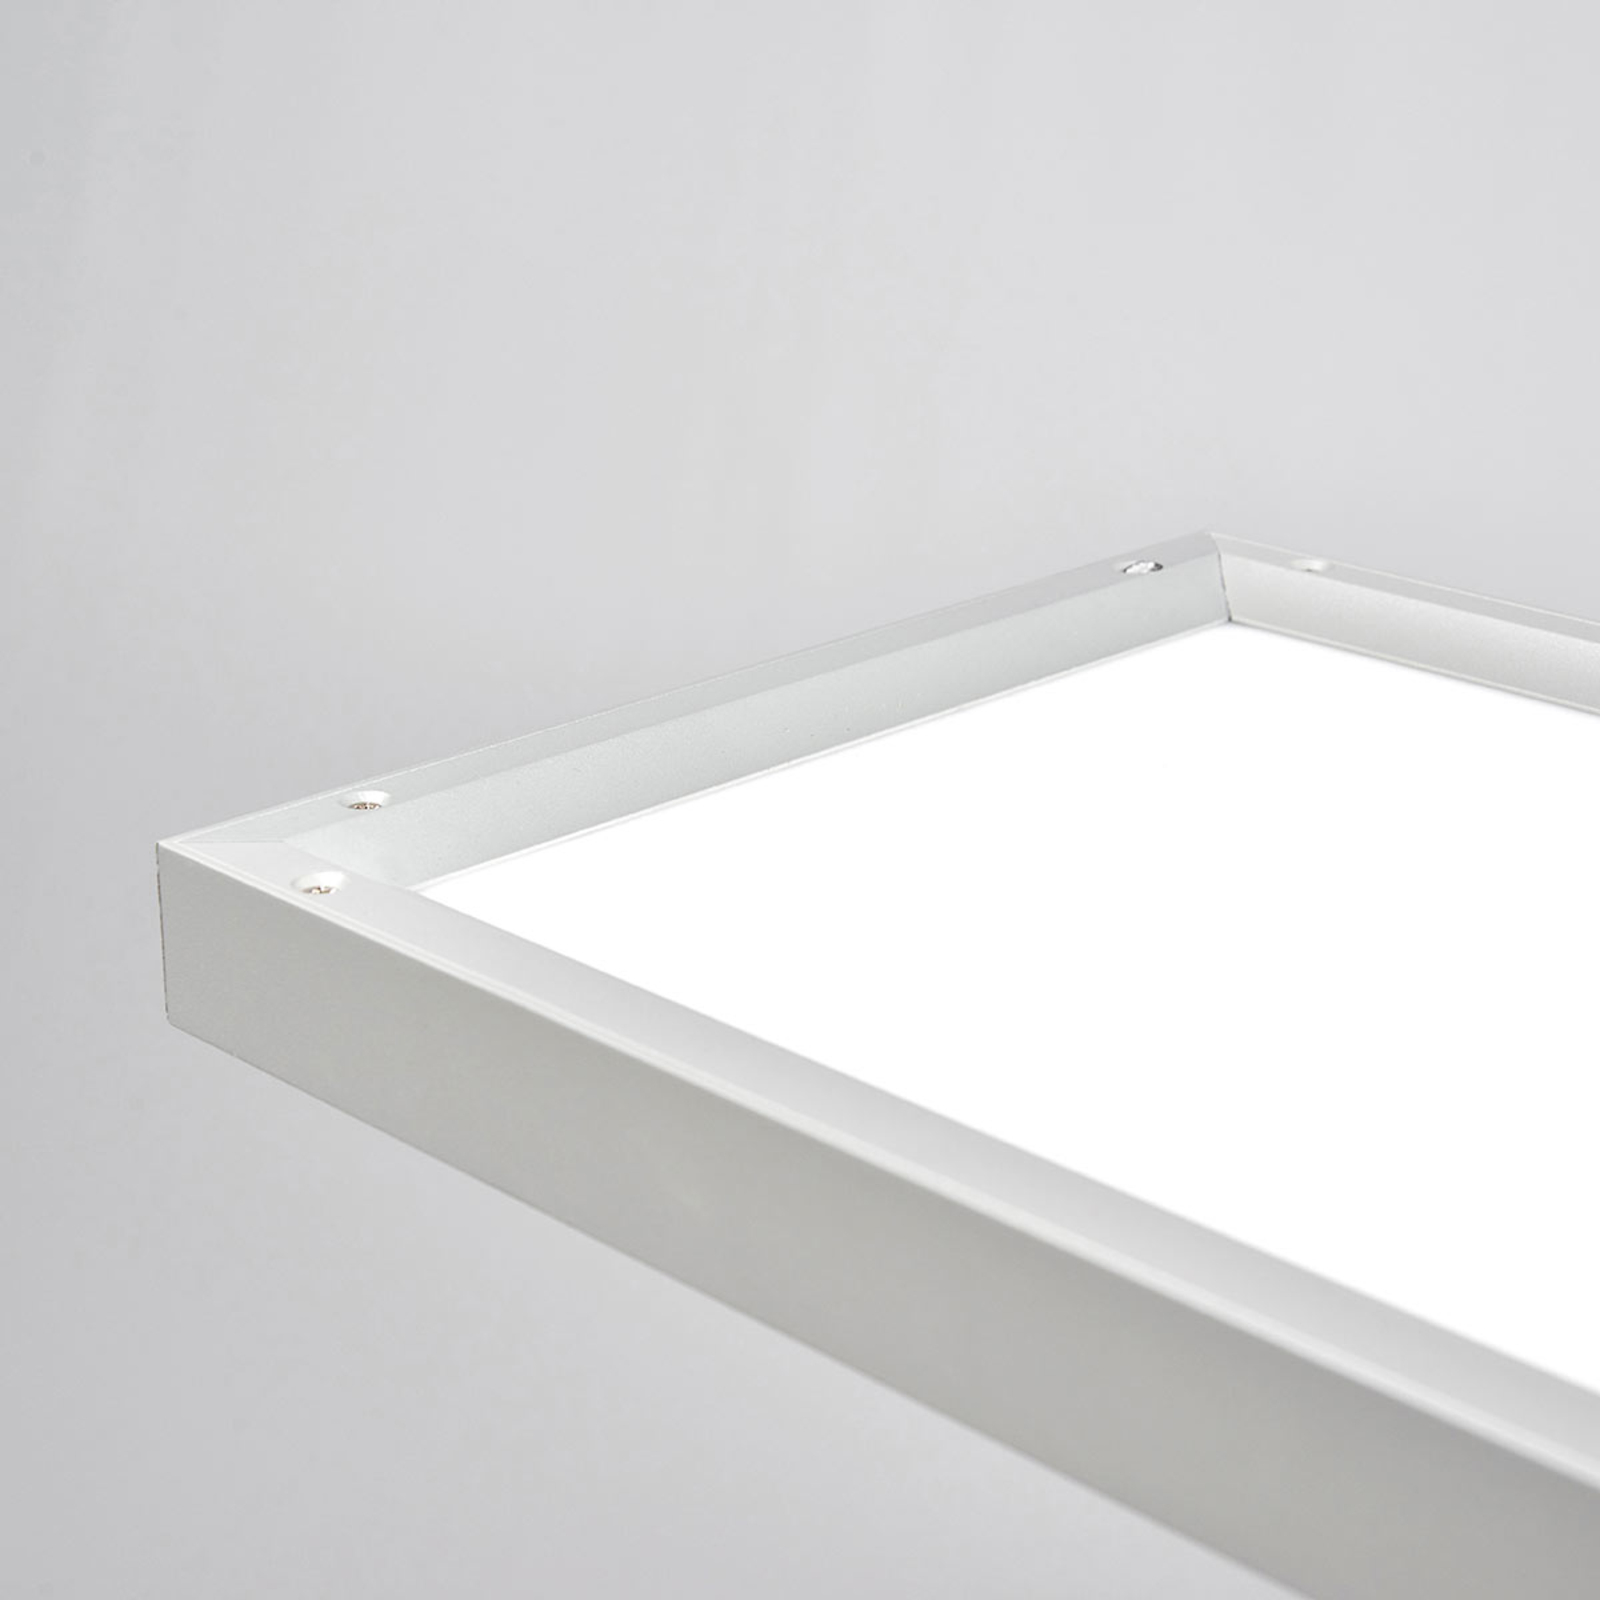 Dimmable LED office hanging light Divia